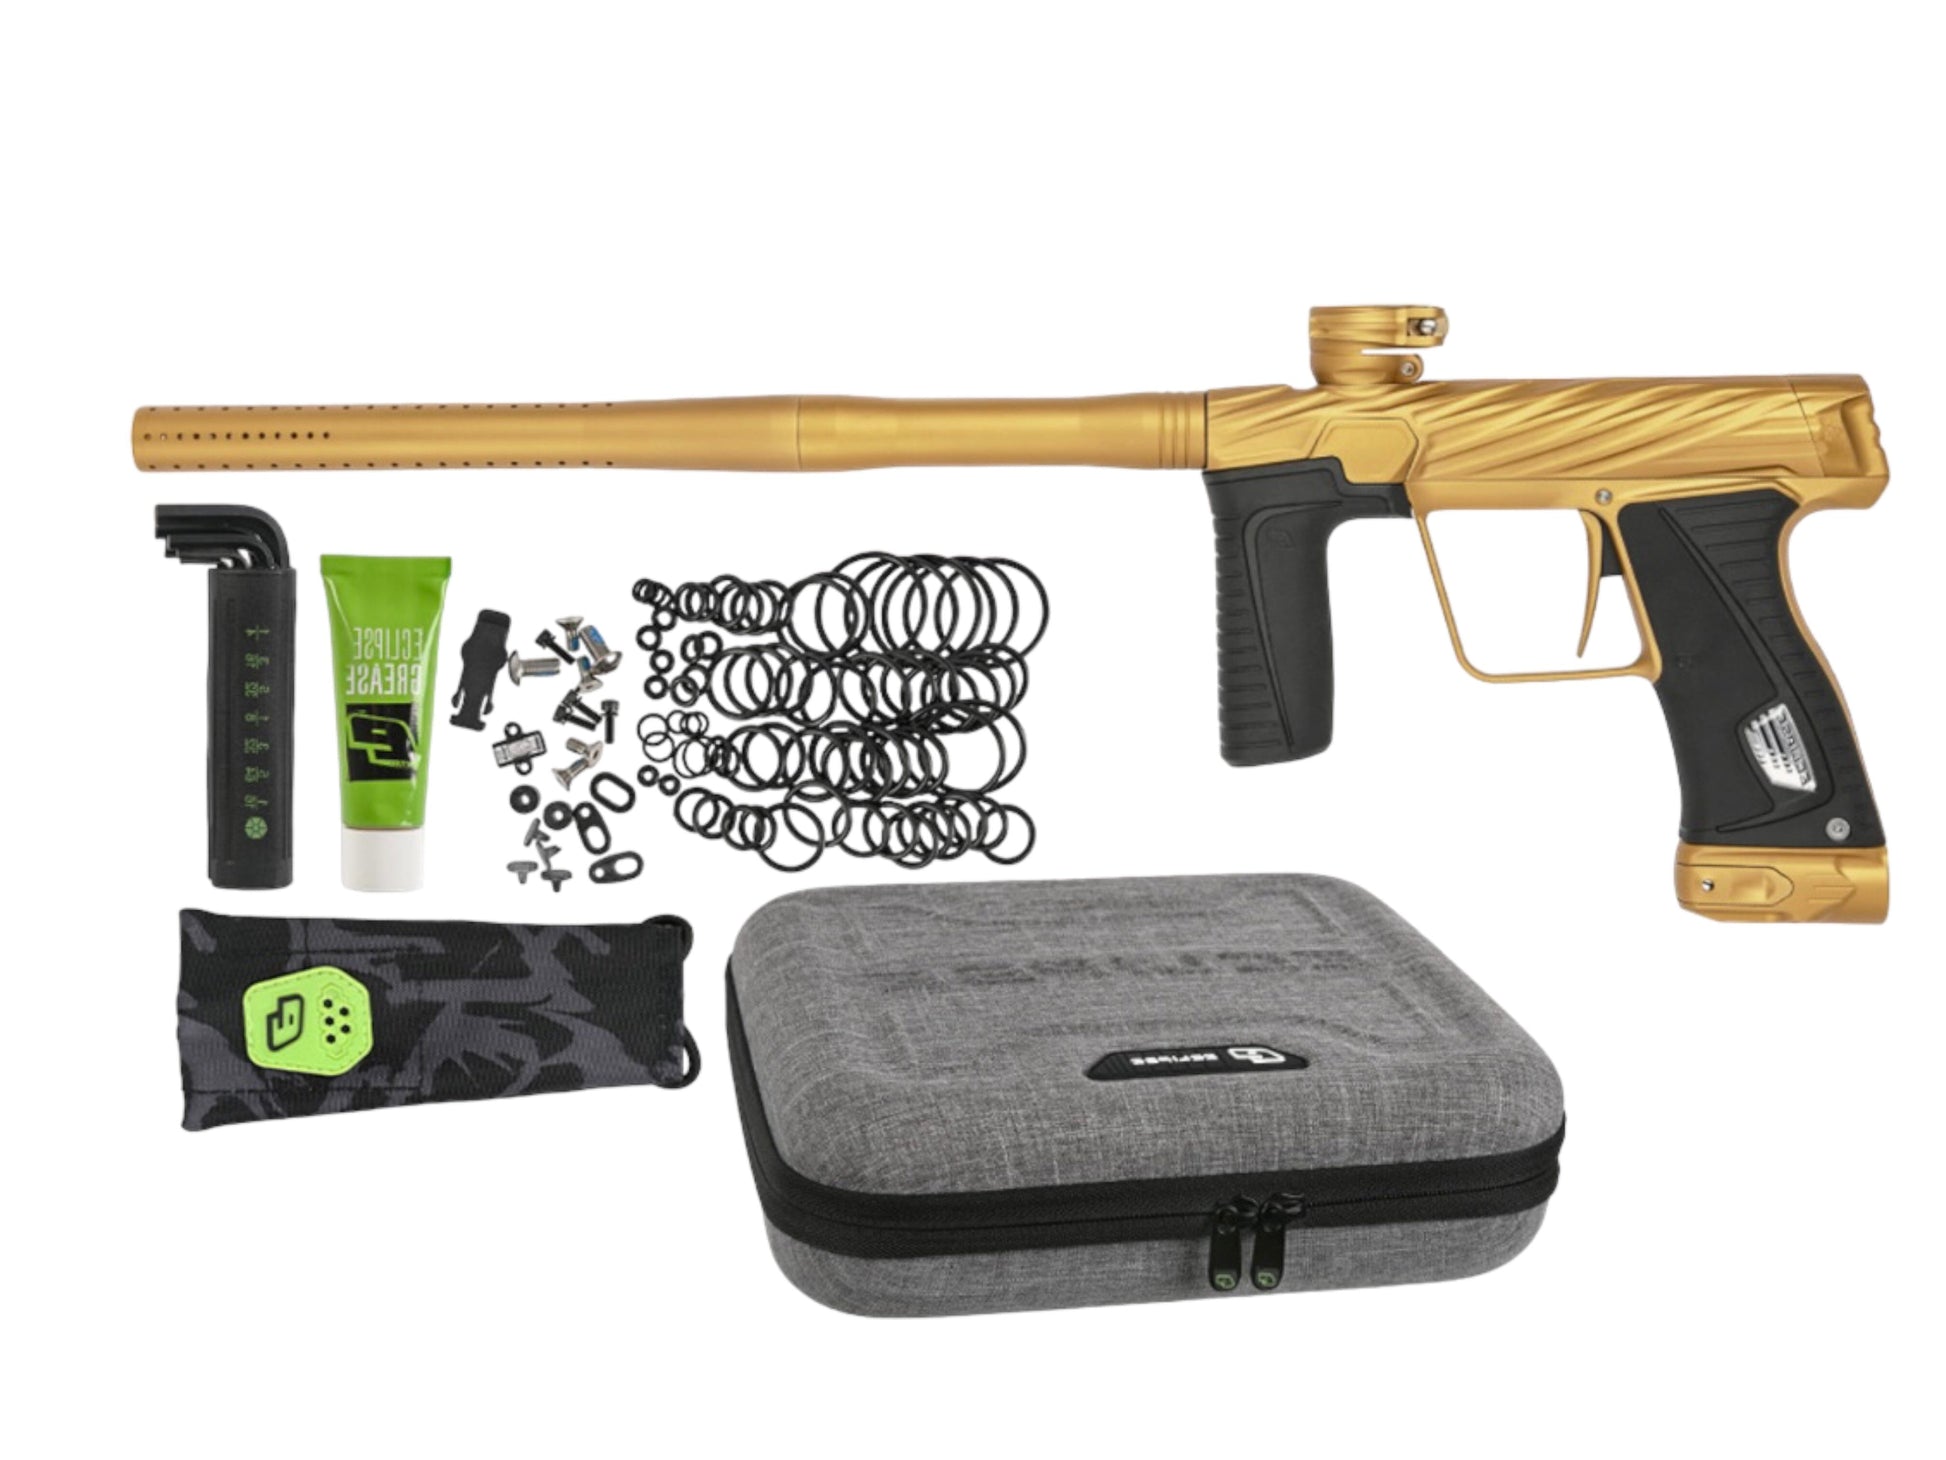 Used HK Army Orbit Gtek 180R- Gold/Gold Paintball Gun from CPXBrosPaintball Buy/Sell/Trade Paintball Markers, Paintball Hoppers, Paintball Masks, and Hormesis Headbands